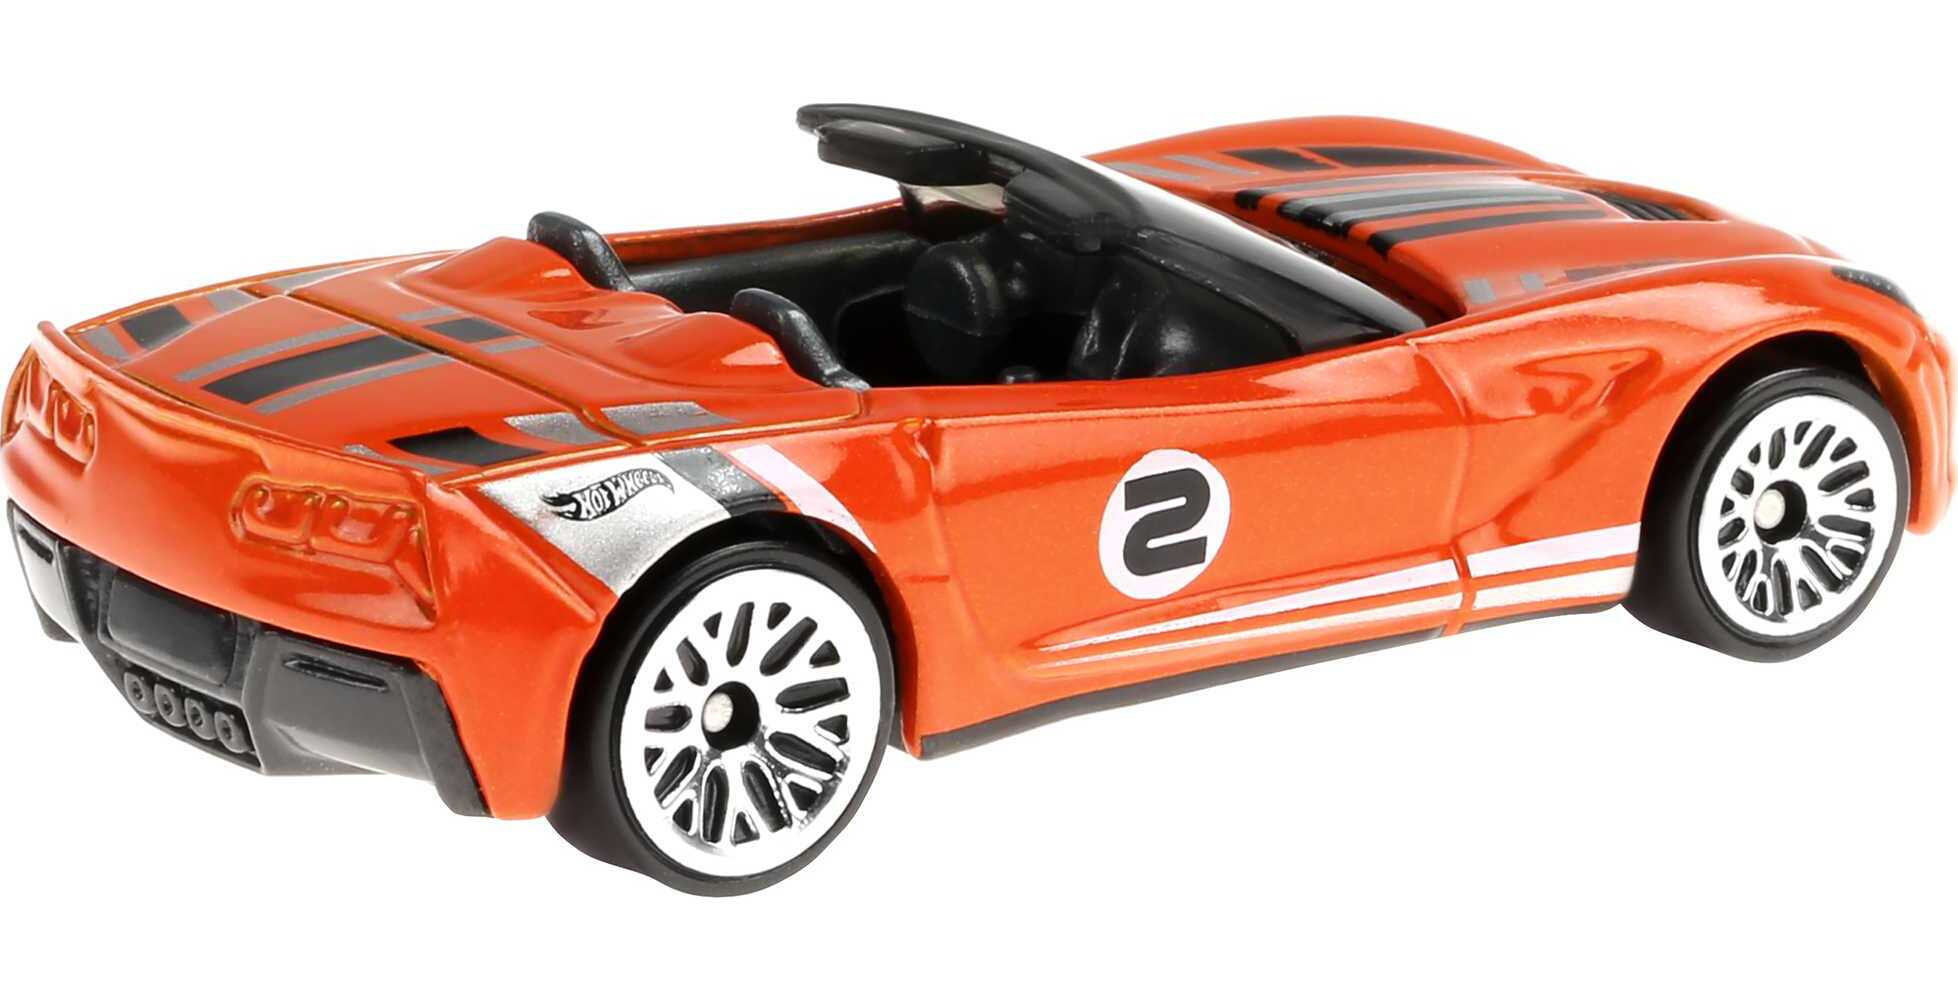 Hot Wheels Mystery Models Surprise Toy Car or Truck in 1:64 Scale (Styles May Vary) - image 2 of 6